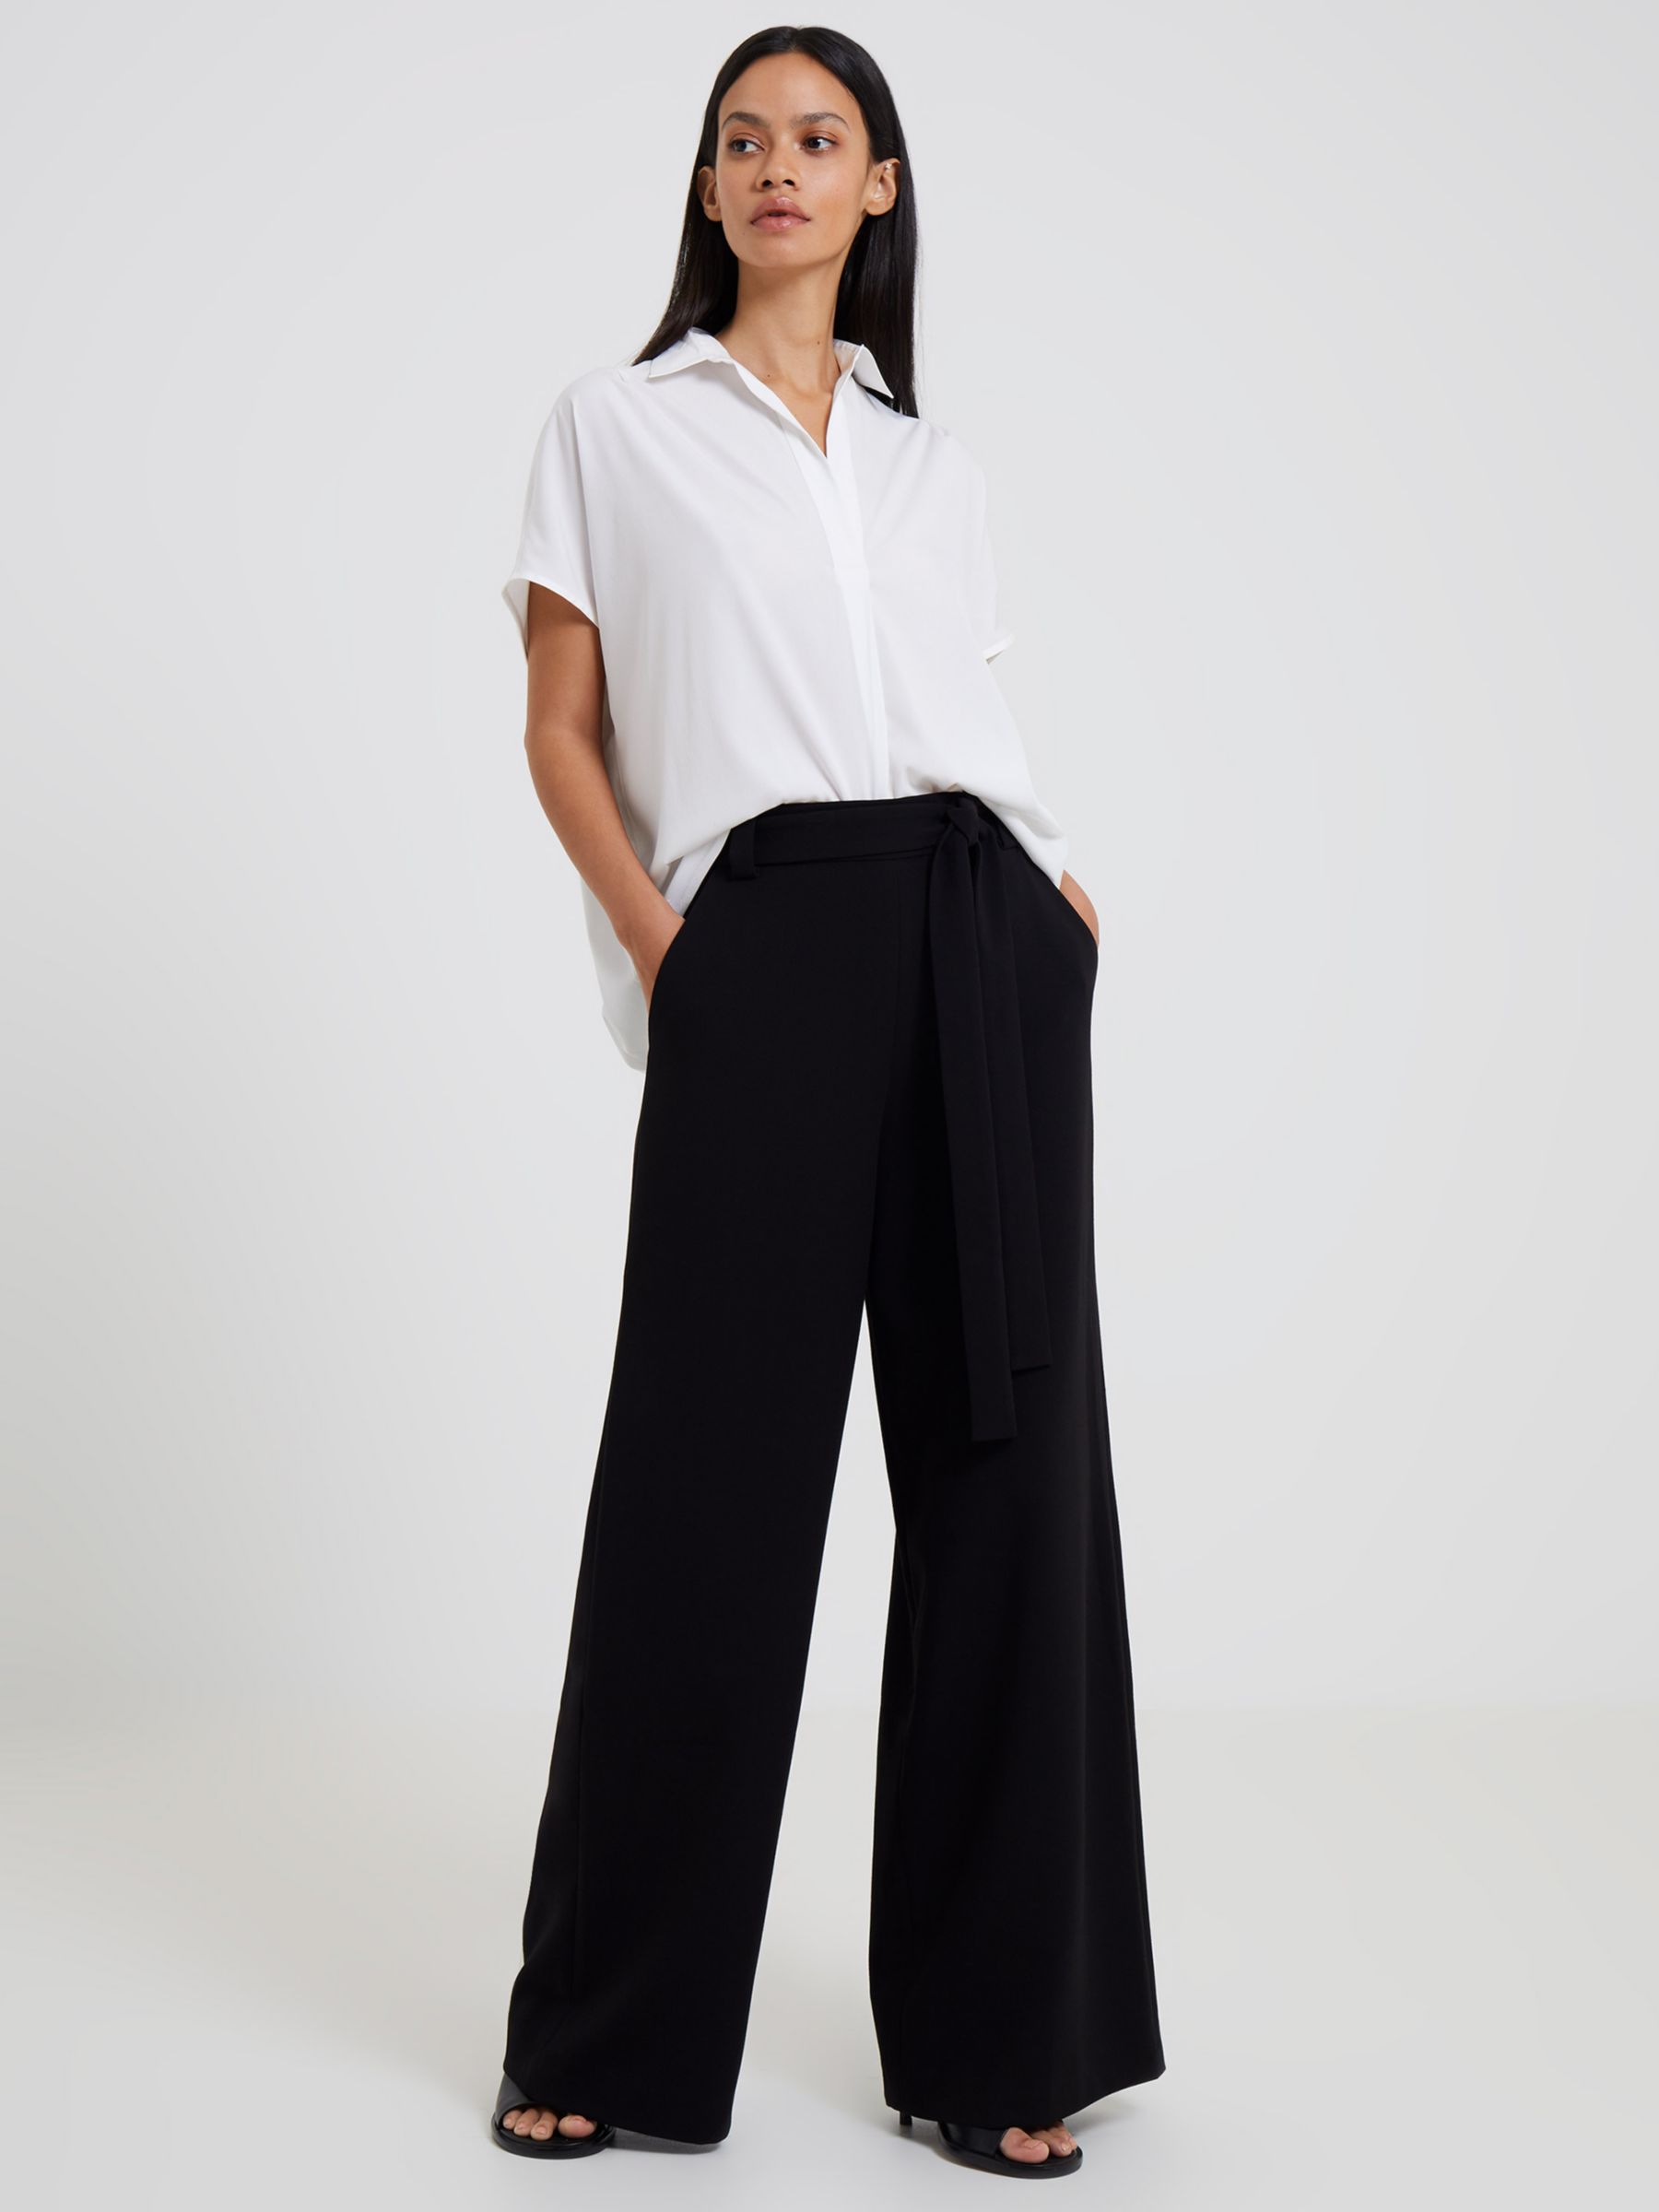 French Connection Wisper Full Length Palazzo Trousers, Black, 12